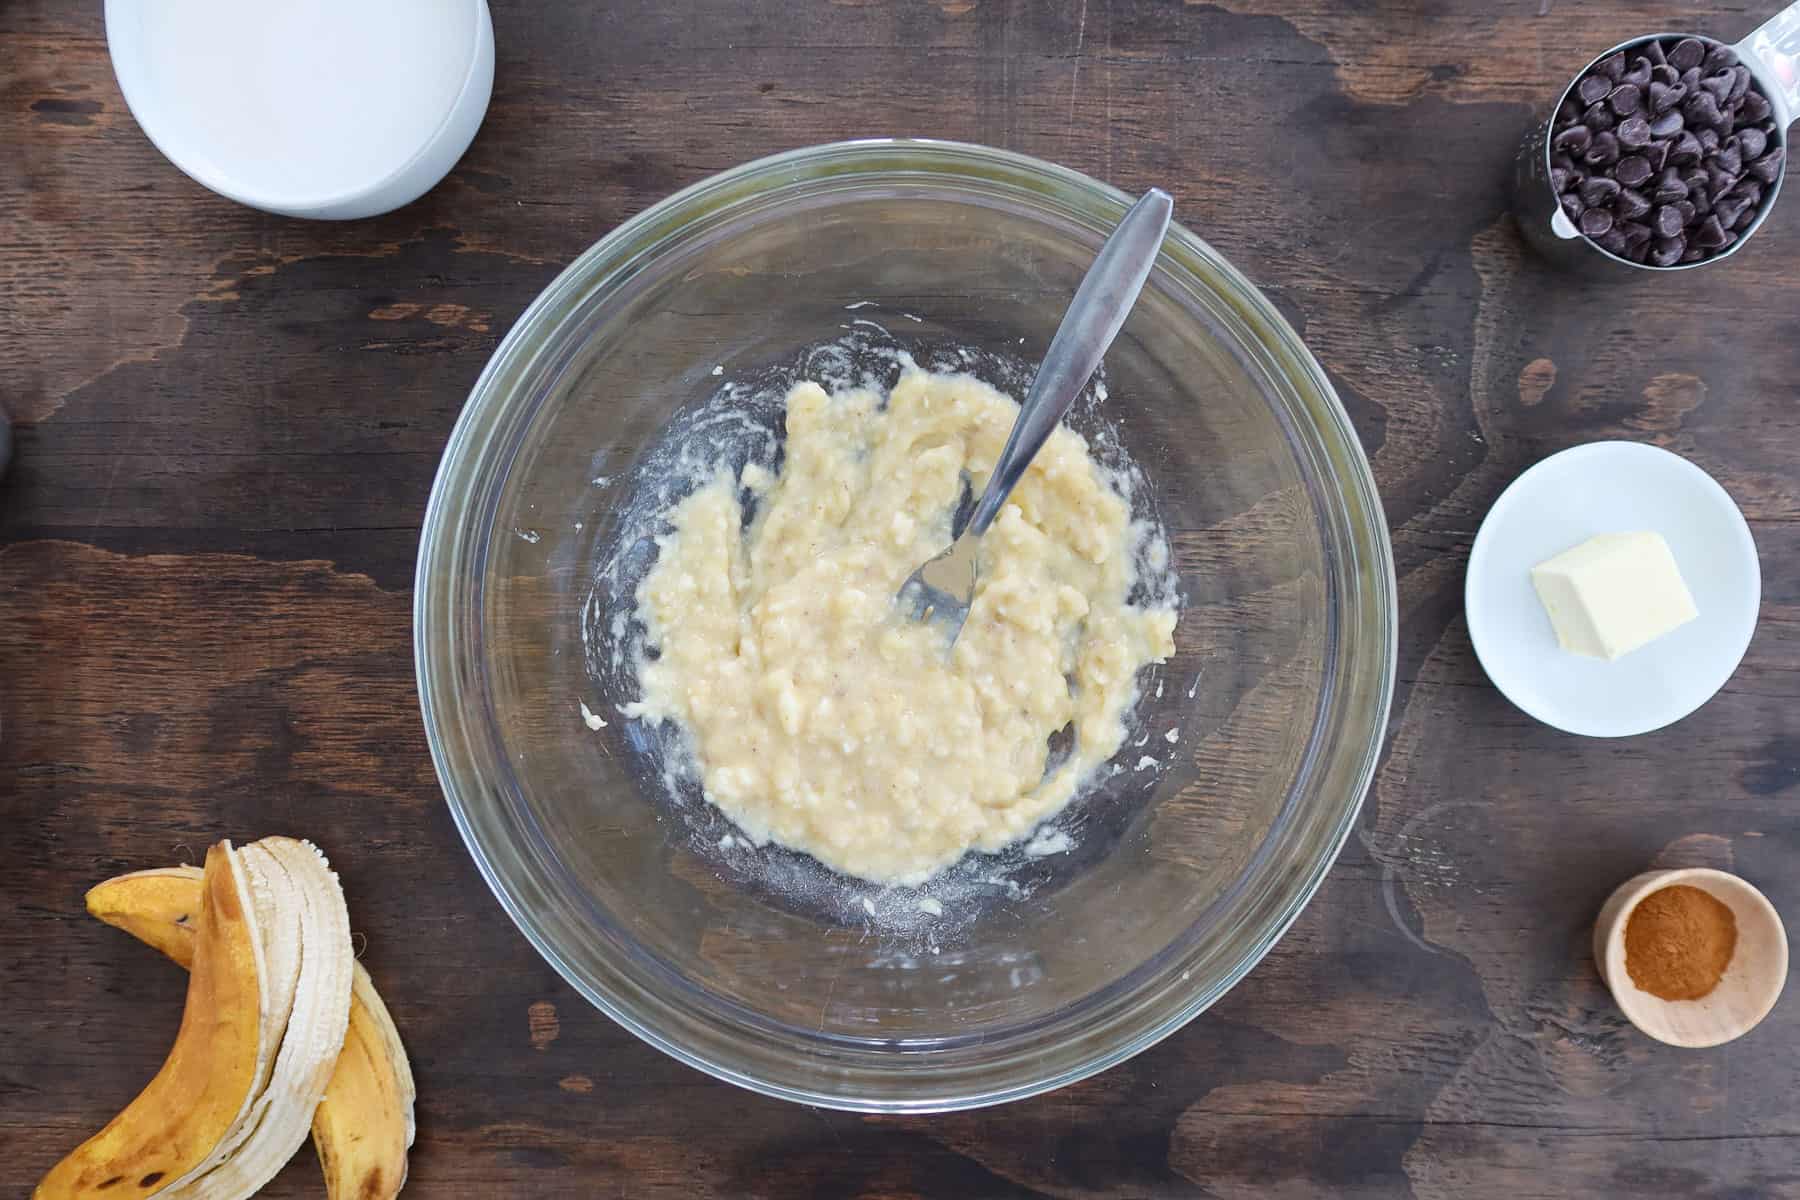 Mashed bananas in a large glass bowl.